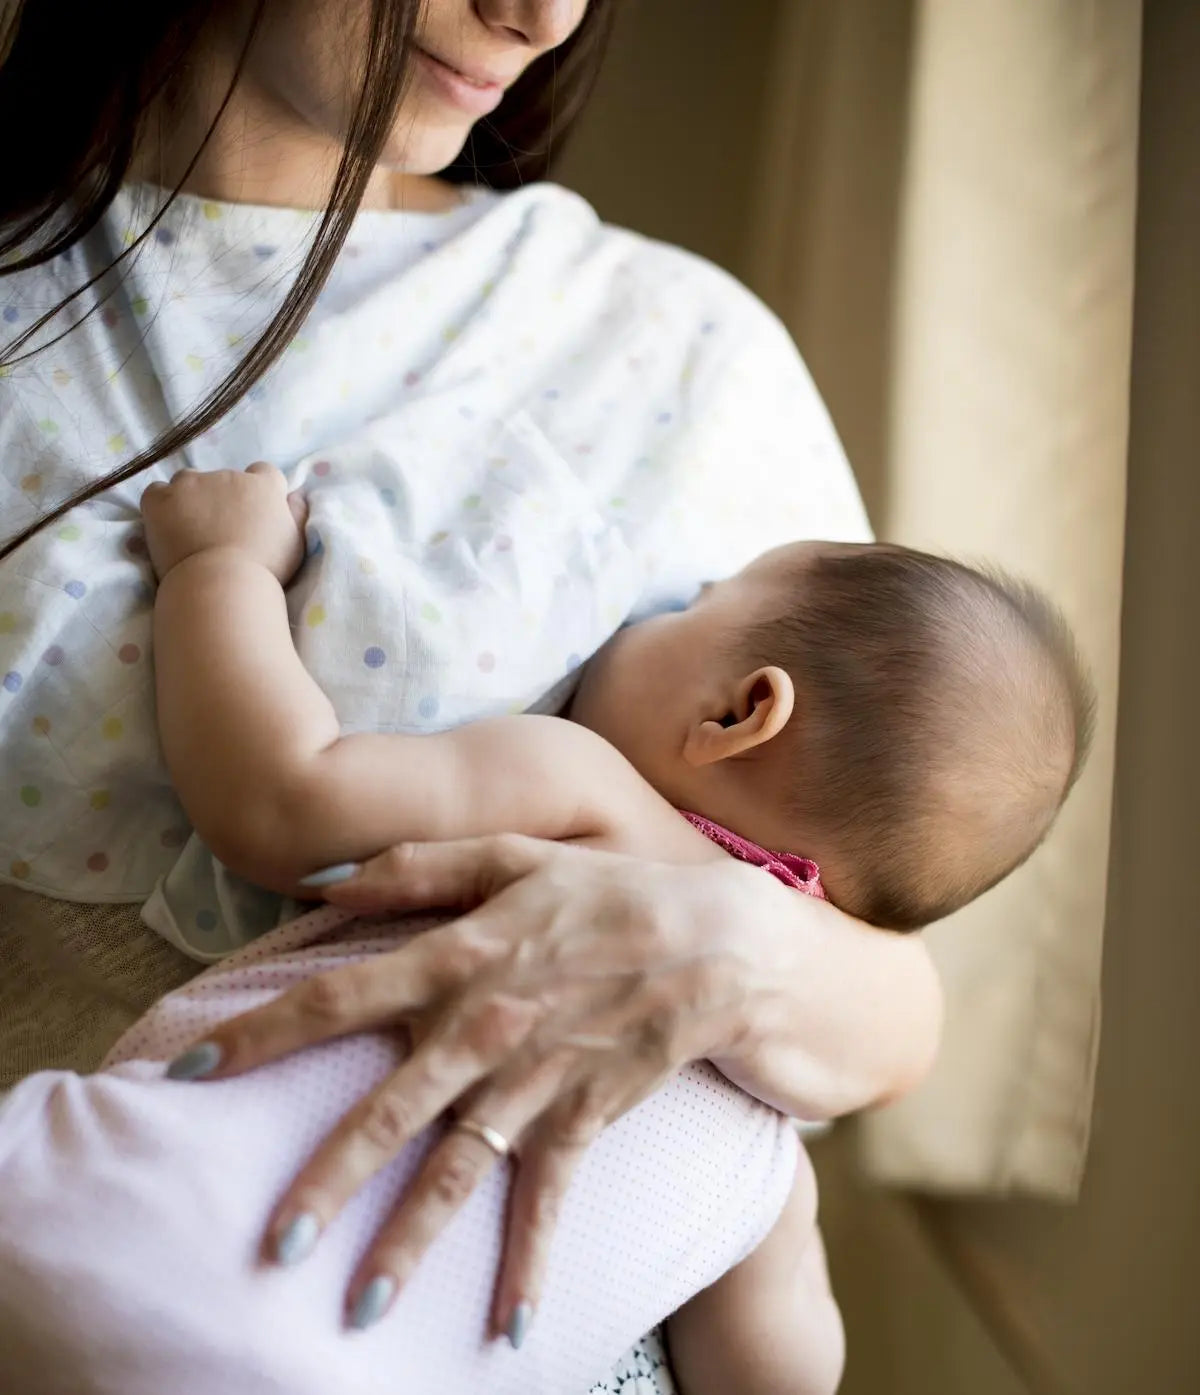 Why Gender-Inclusive Lactation-Related Language Matters